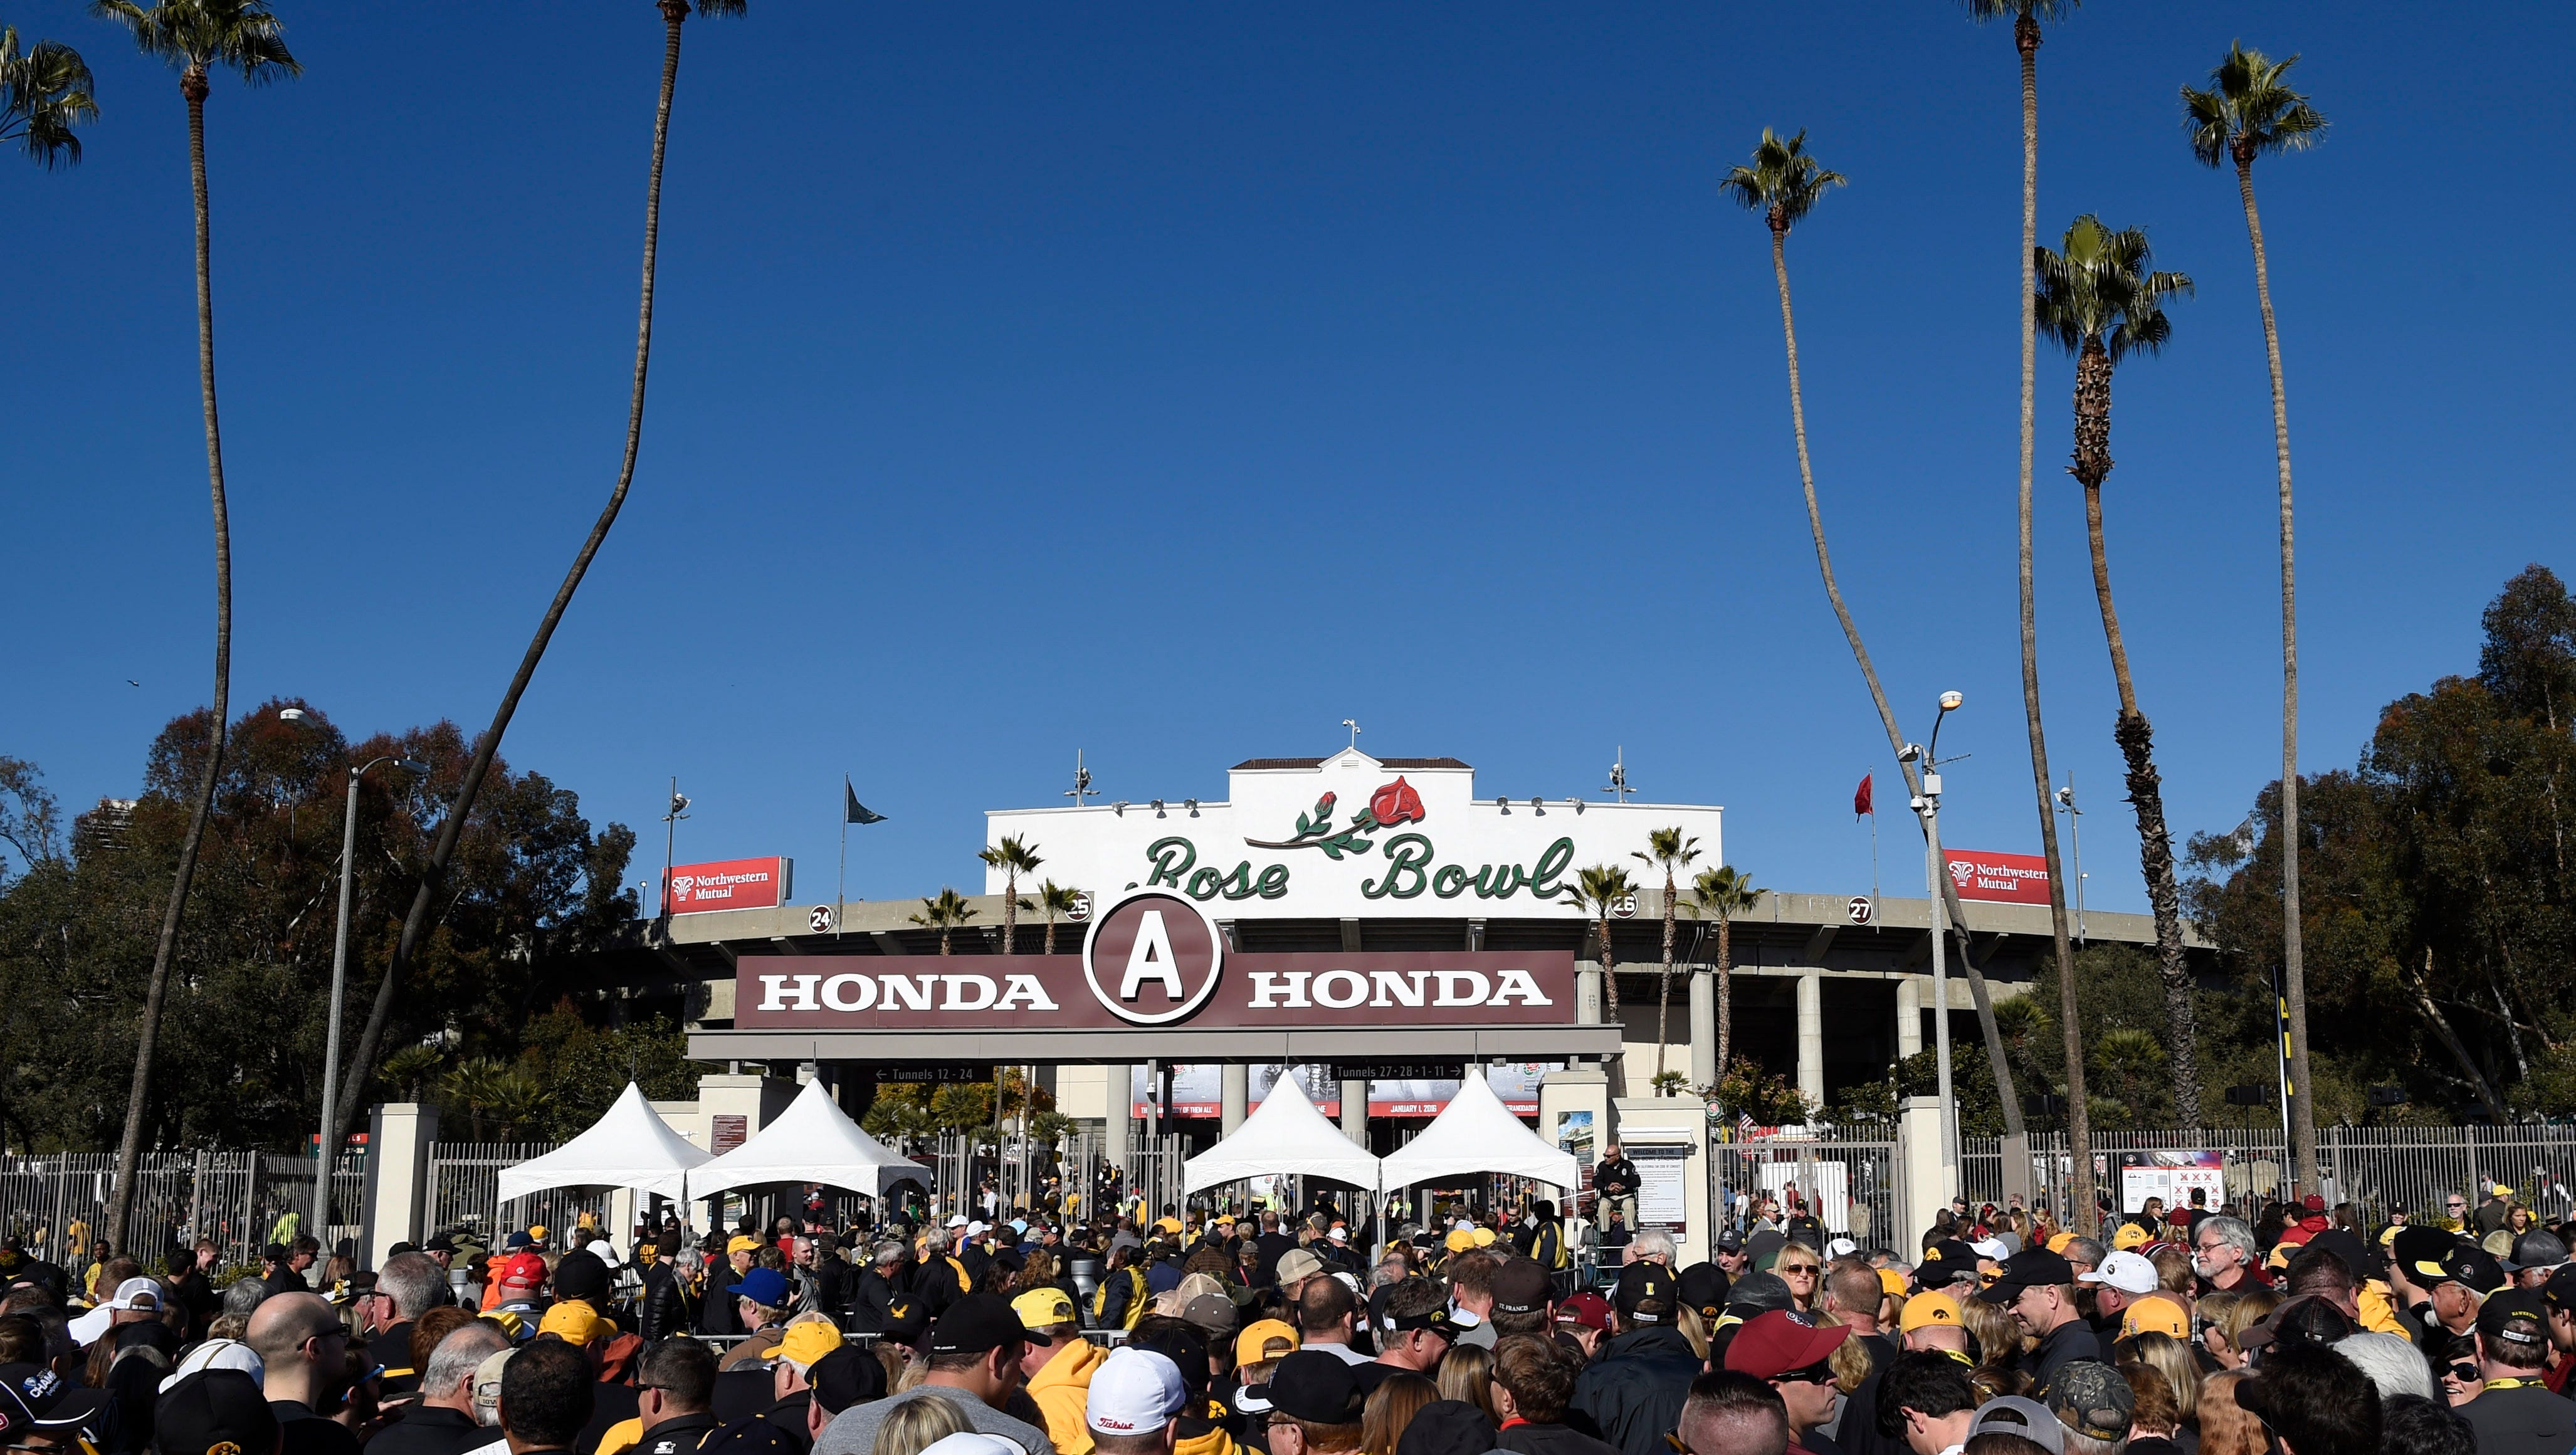 Fans wait to enter the Rose Bowl before the game between the Iowa Hawkeyes and the Stanford Cardinal in the 2016 Rose Bowl.